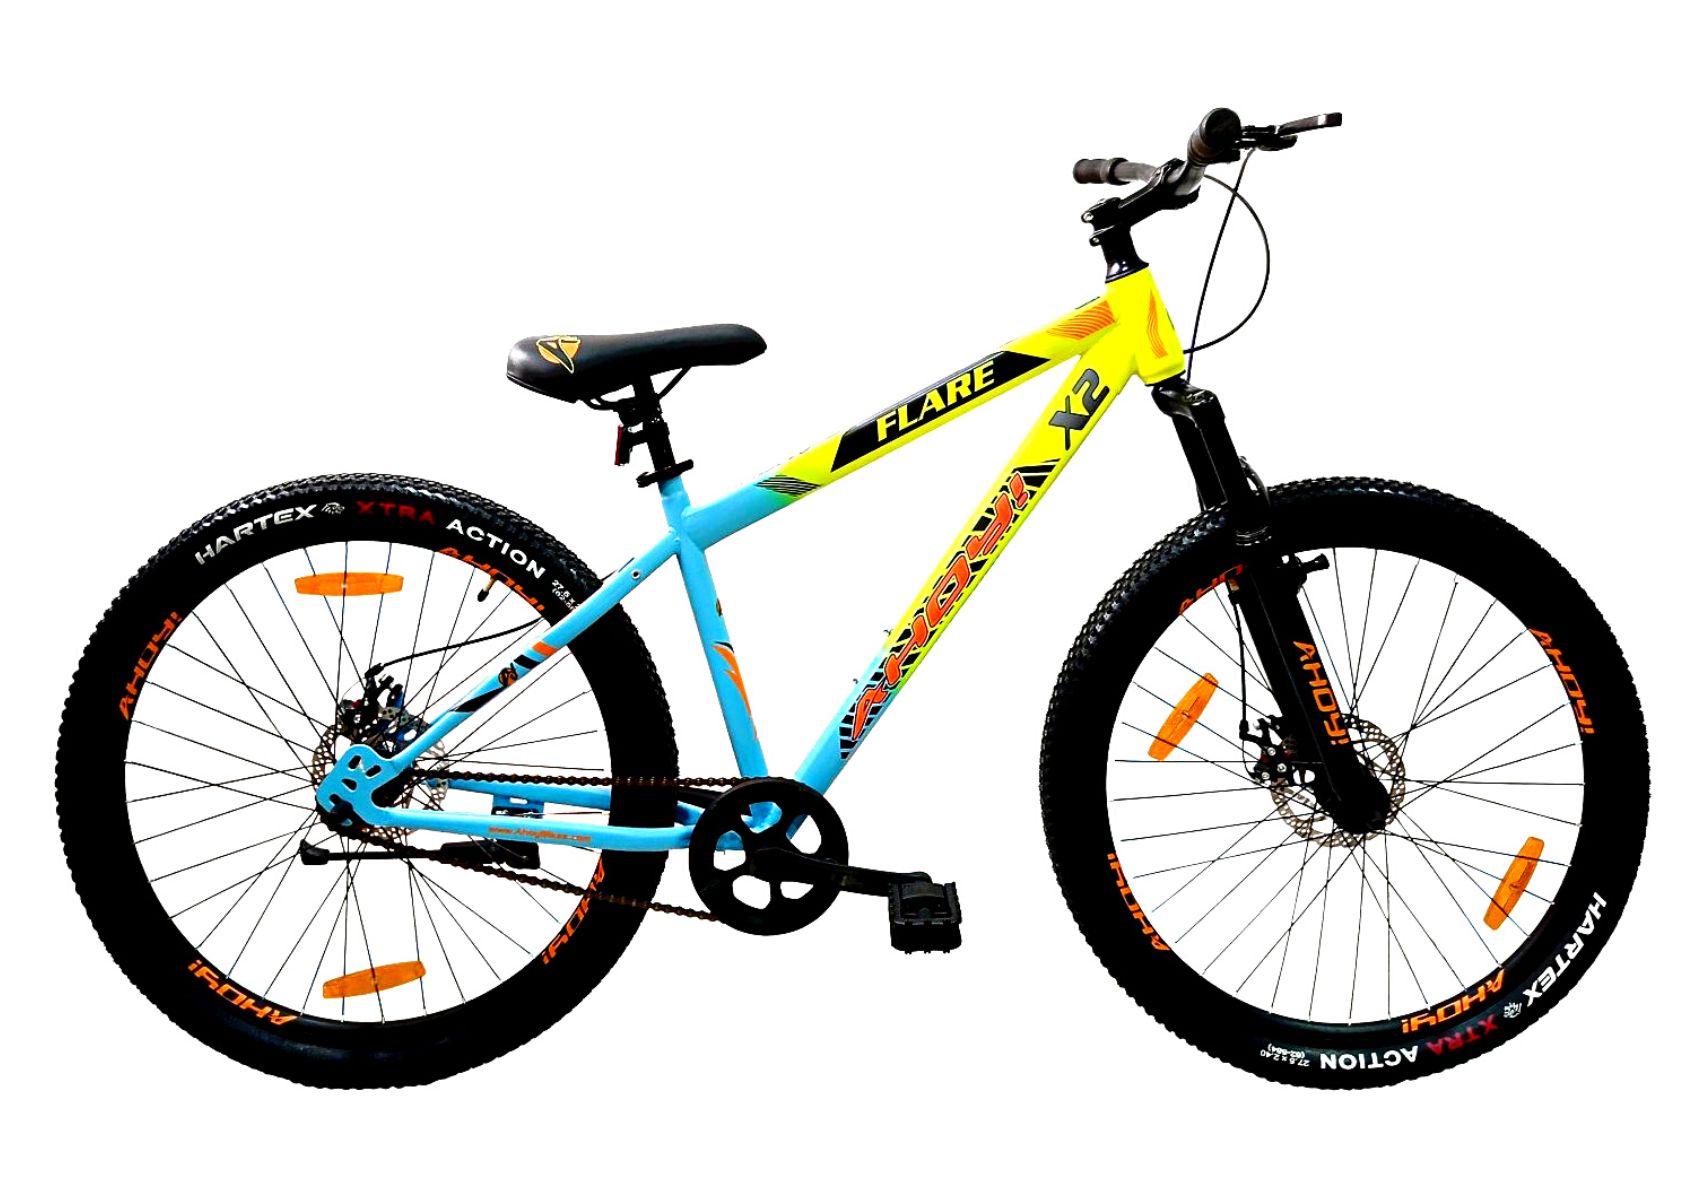 Flare Cycle Without Gear 29T | Buy Blue All Terrain Bike for Men